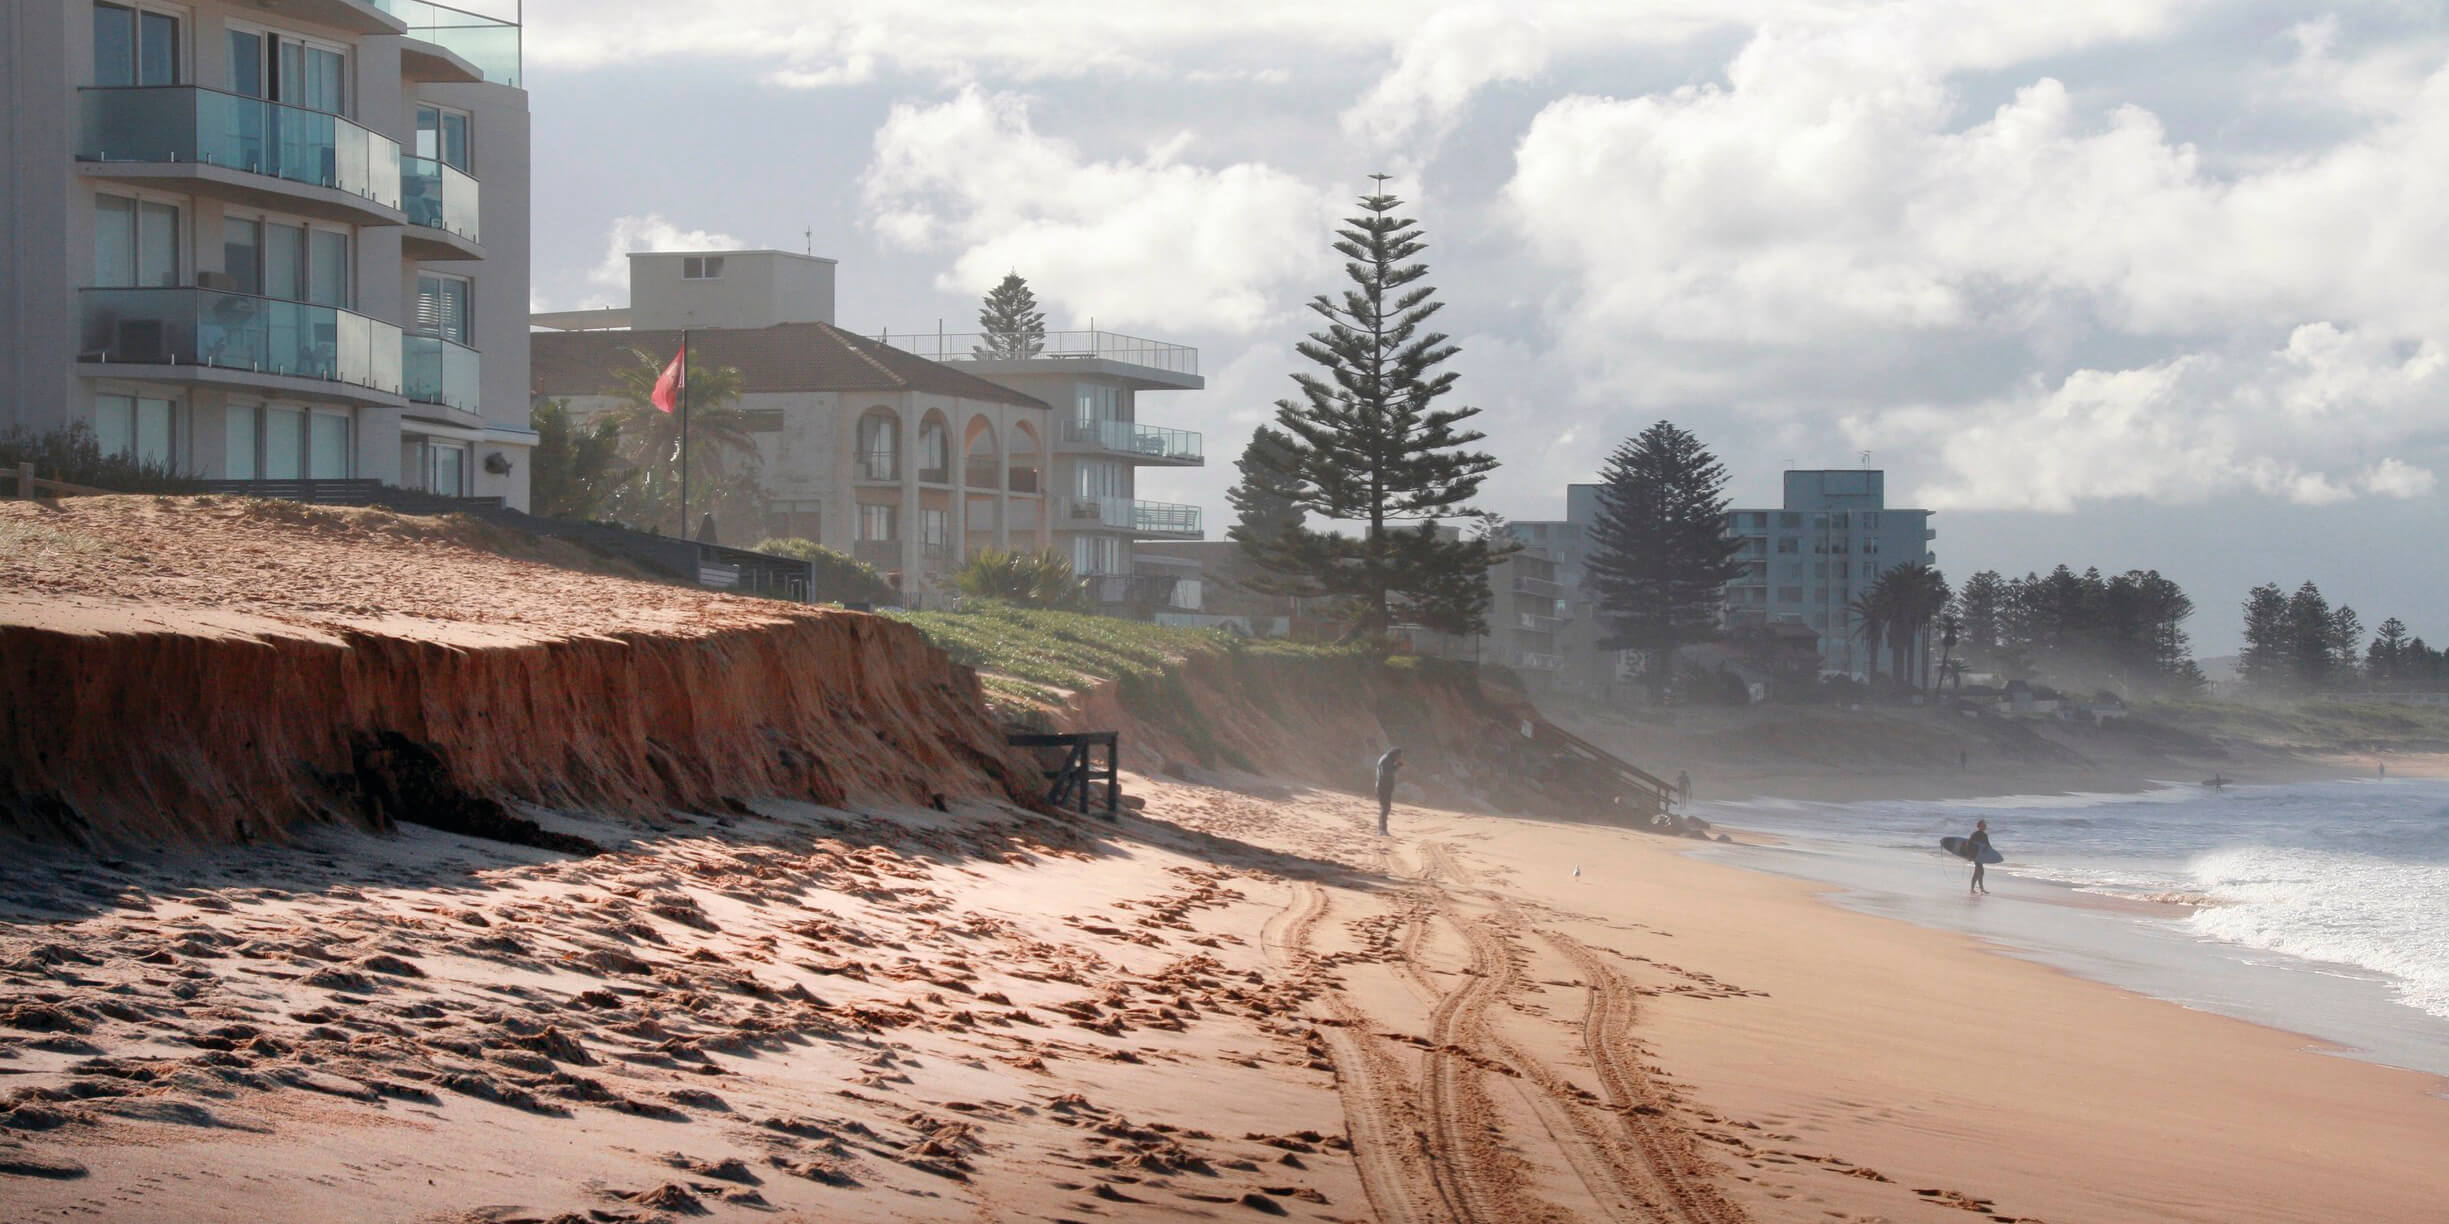 Beach erosion close to habitations in stormy weather.